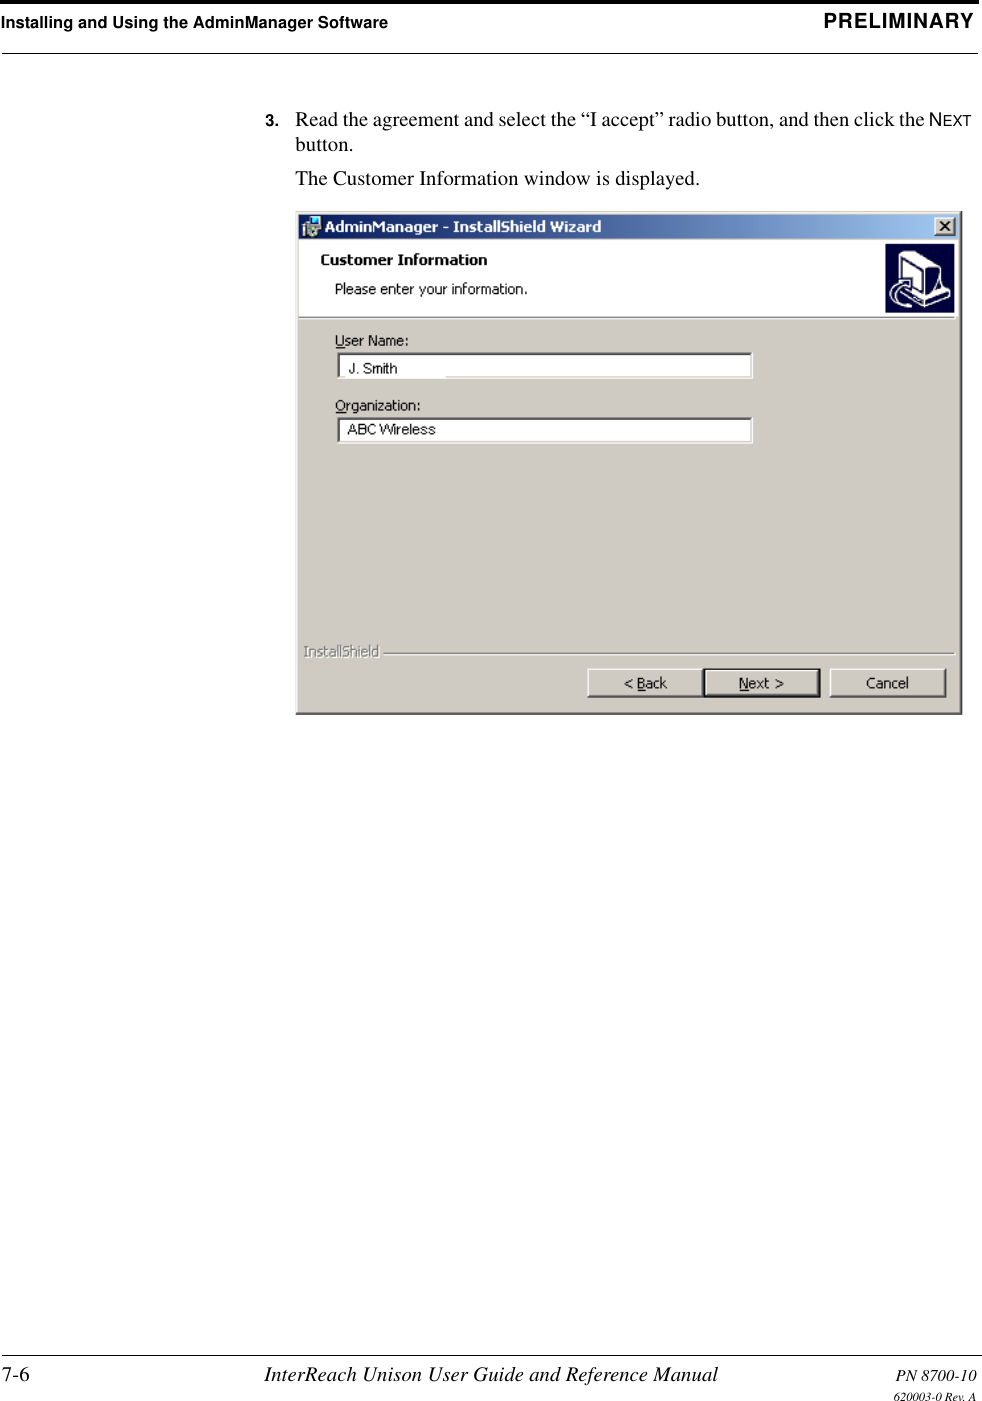 Installing and Using the AdminManager Software PRELIMINARY7-6 InterReach Unison User Guide and Reference Manual PN 8700-10620003-0 Rev. A3. Read the agreement and select the “I accept” radio button, and then click the NEXT button.The Customer Information window is displayed.